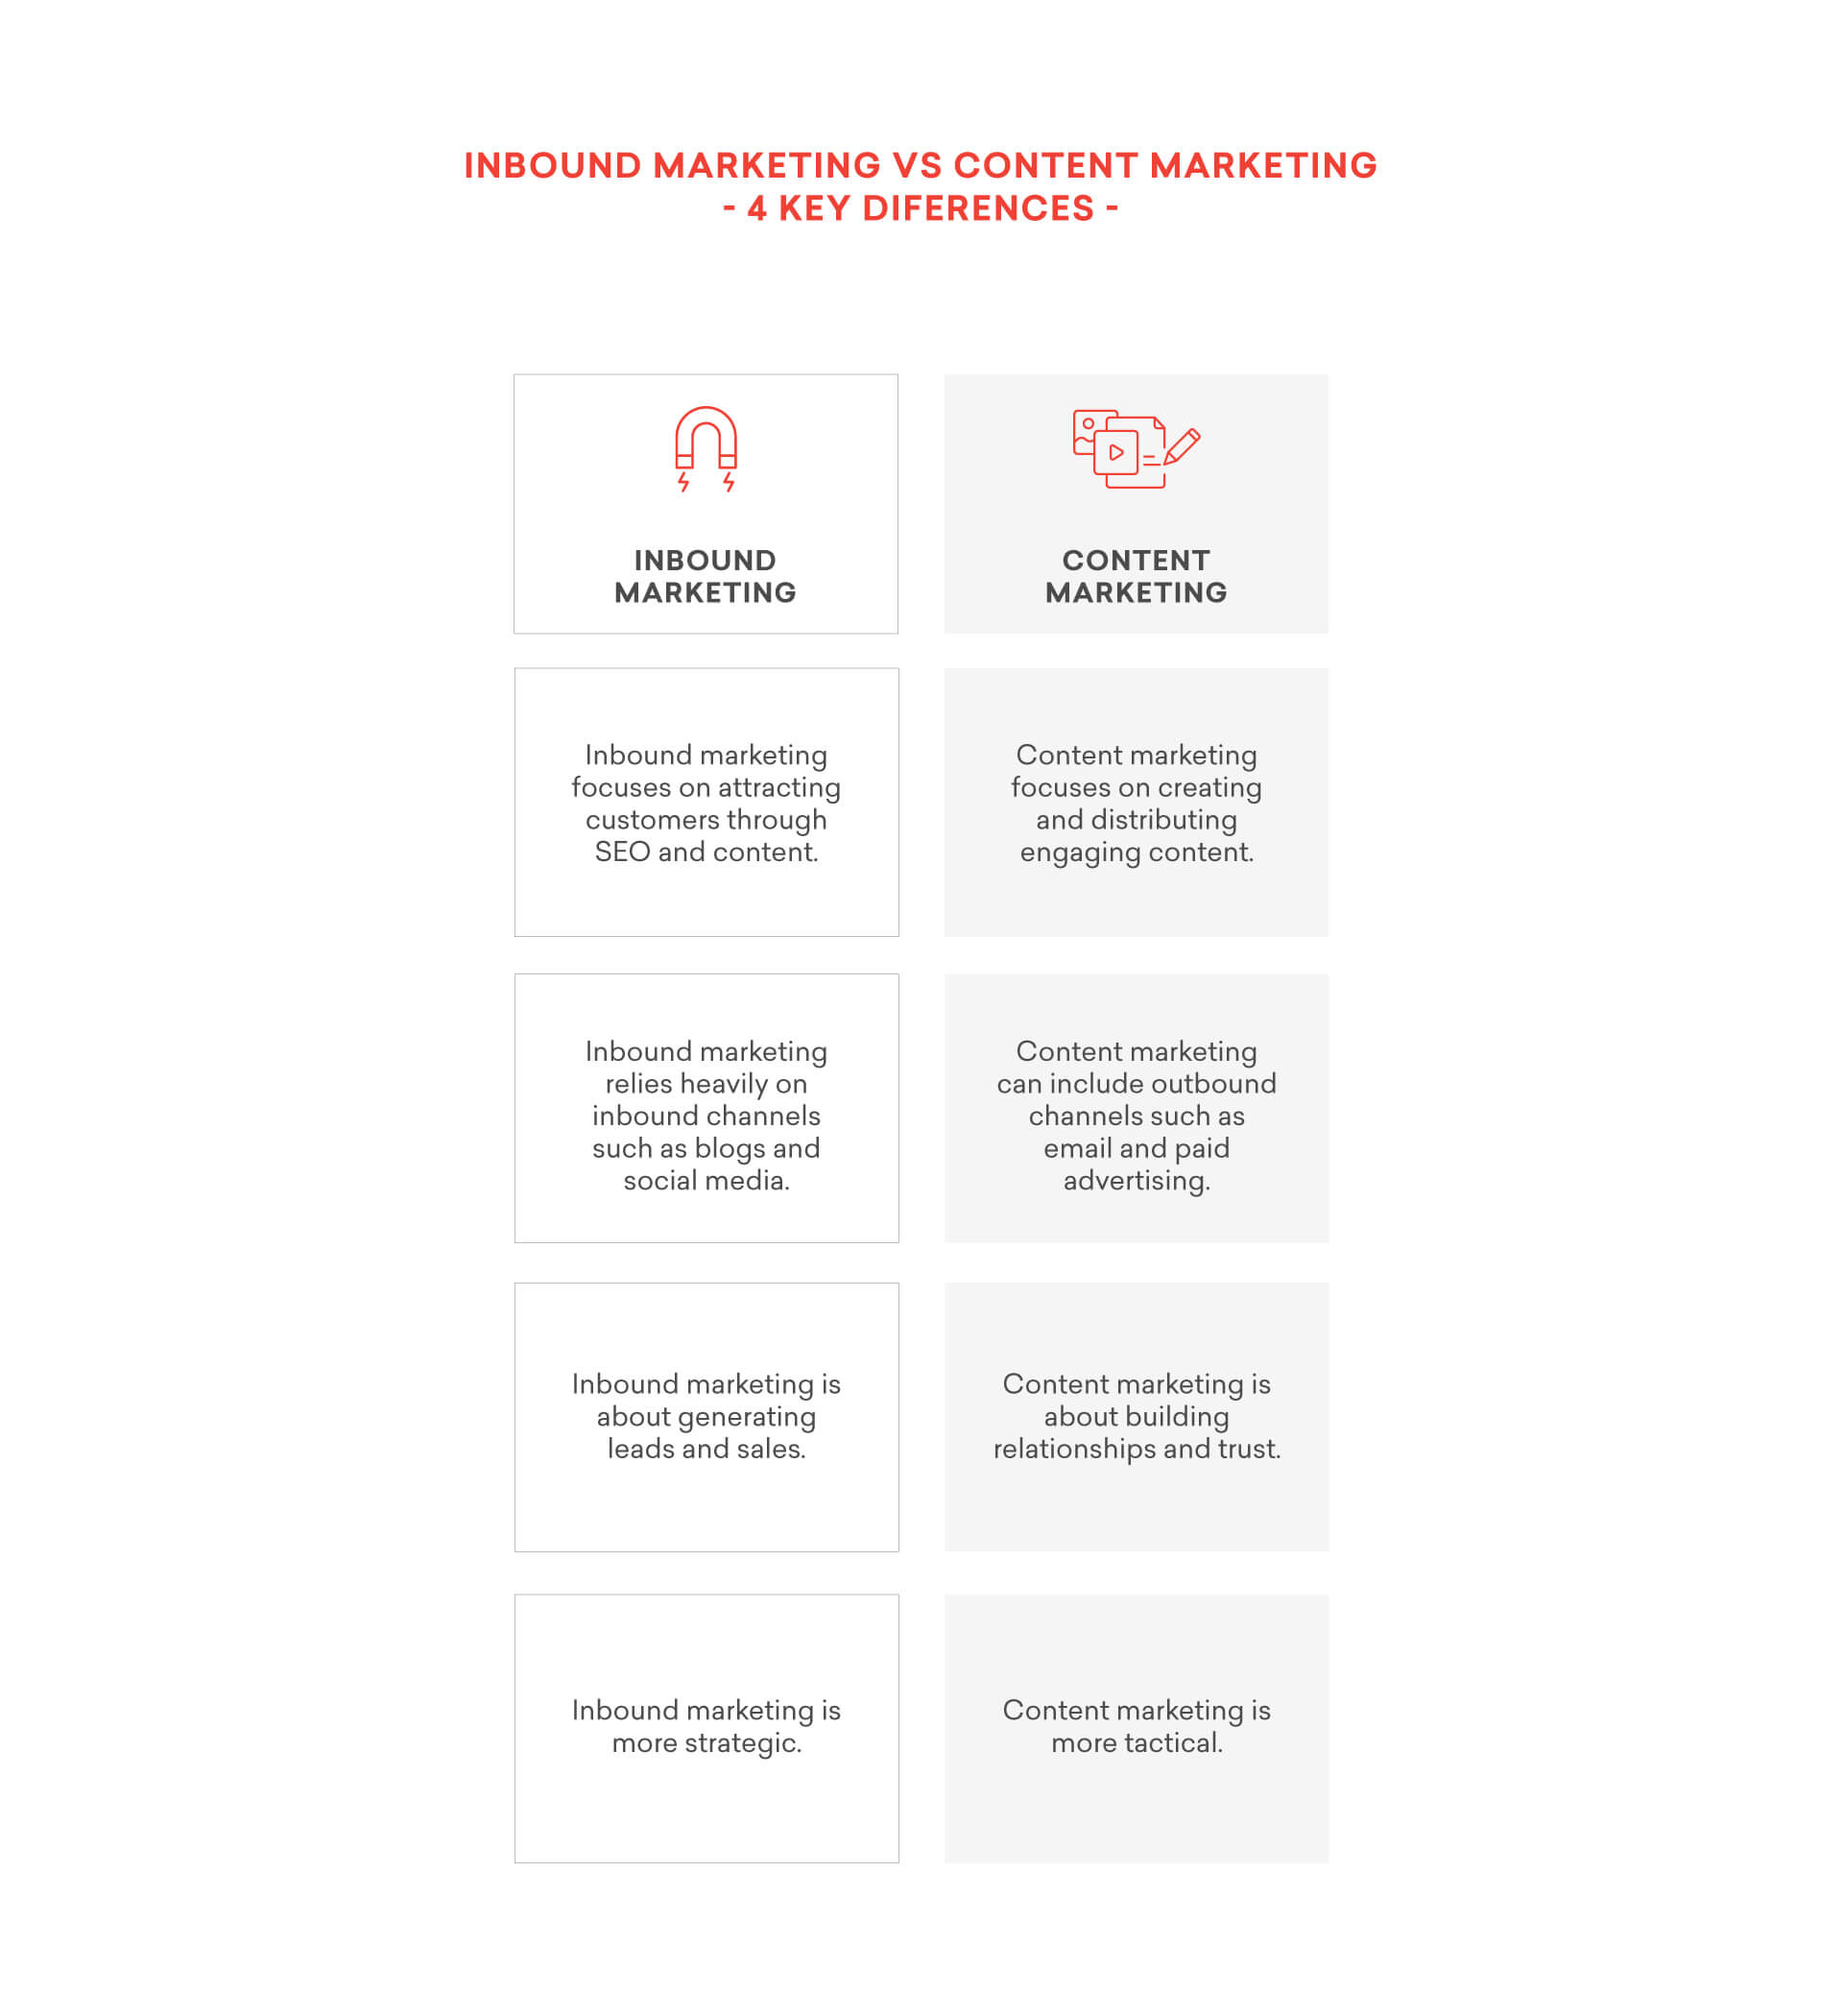 Key differences between inbound and content marketing